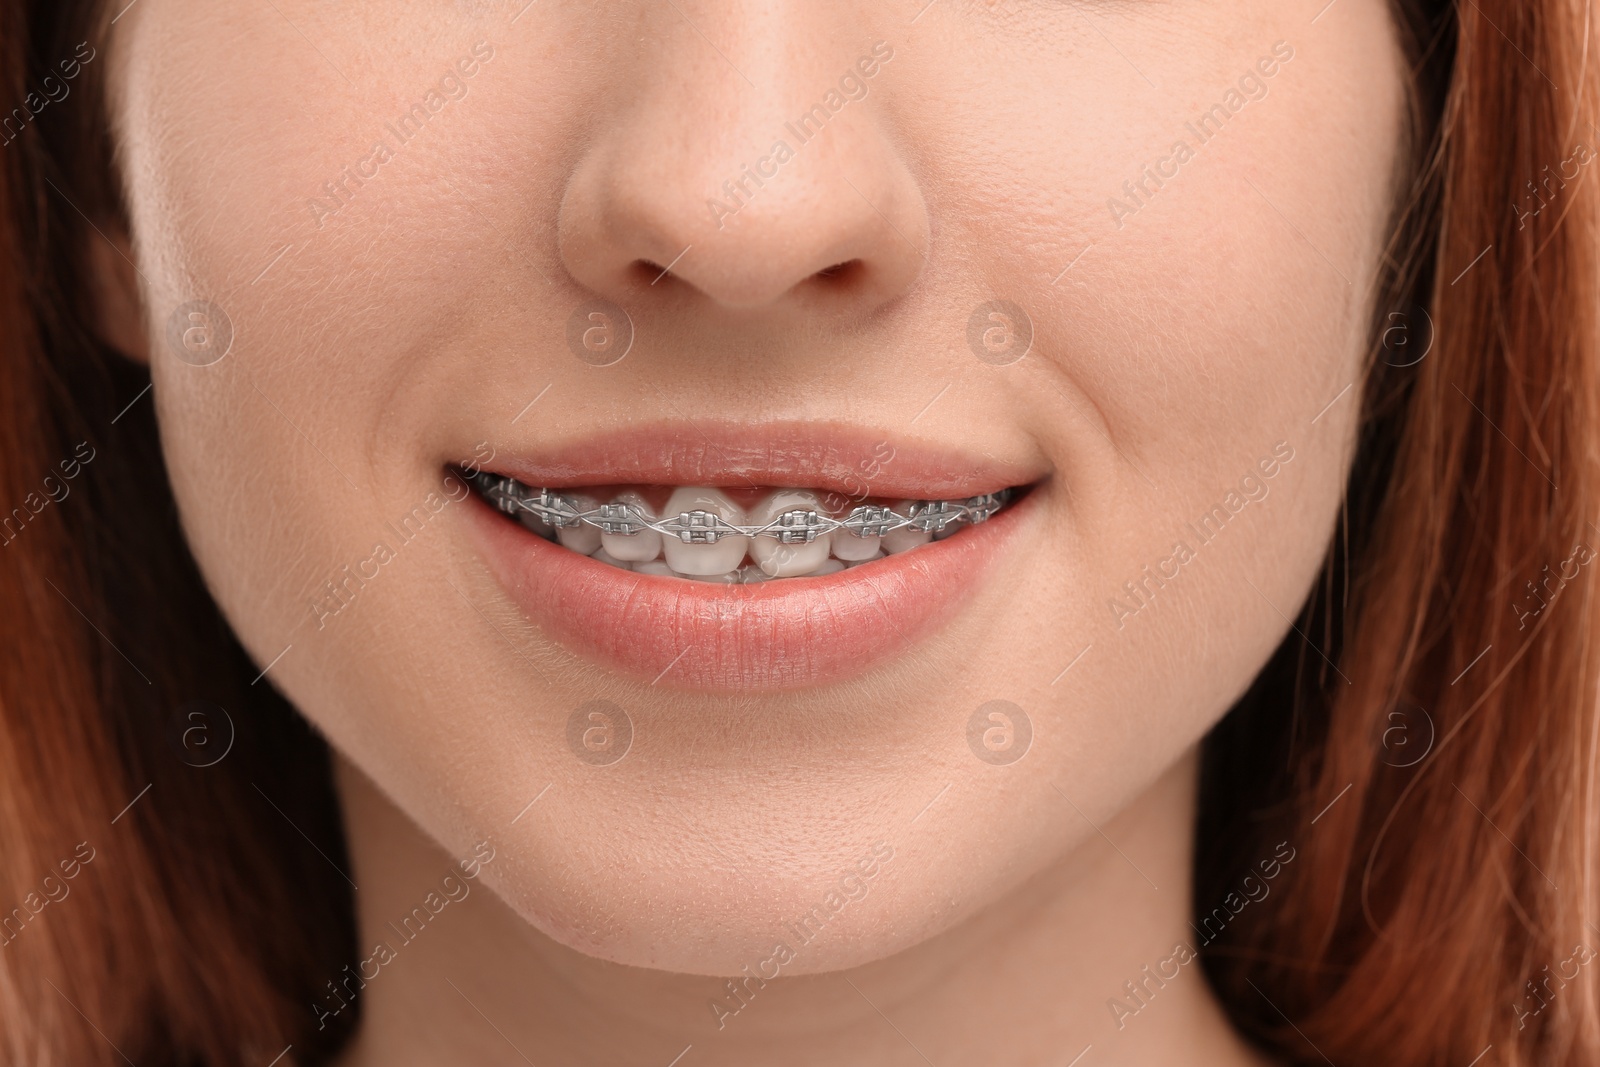 Photo of Smiling woman with dental braces, closeup view